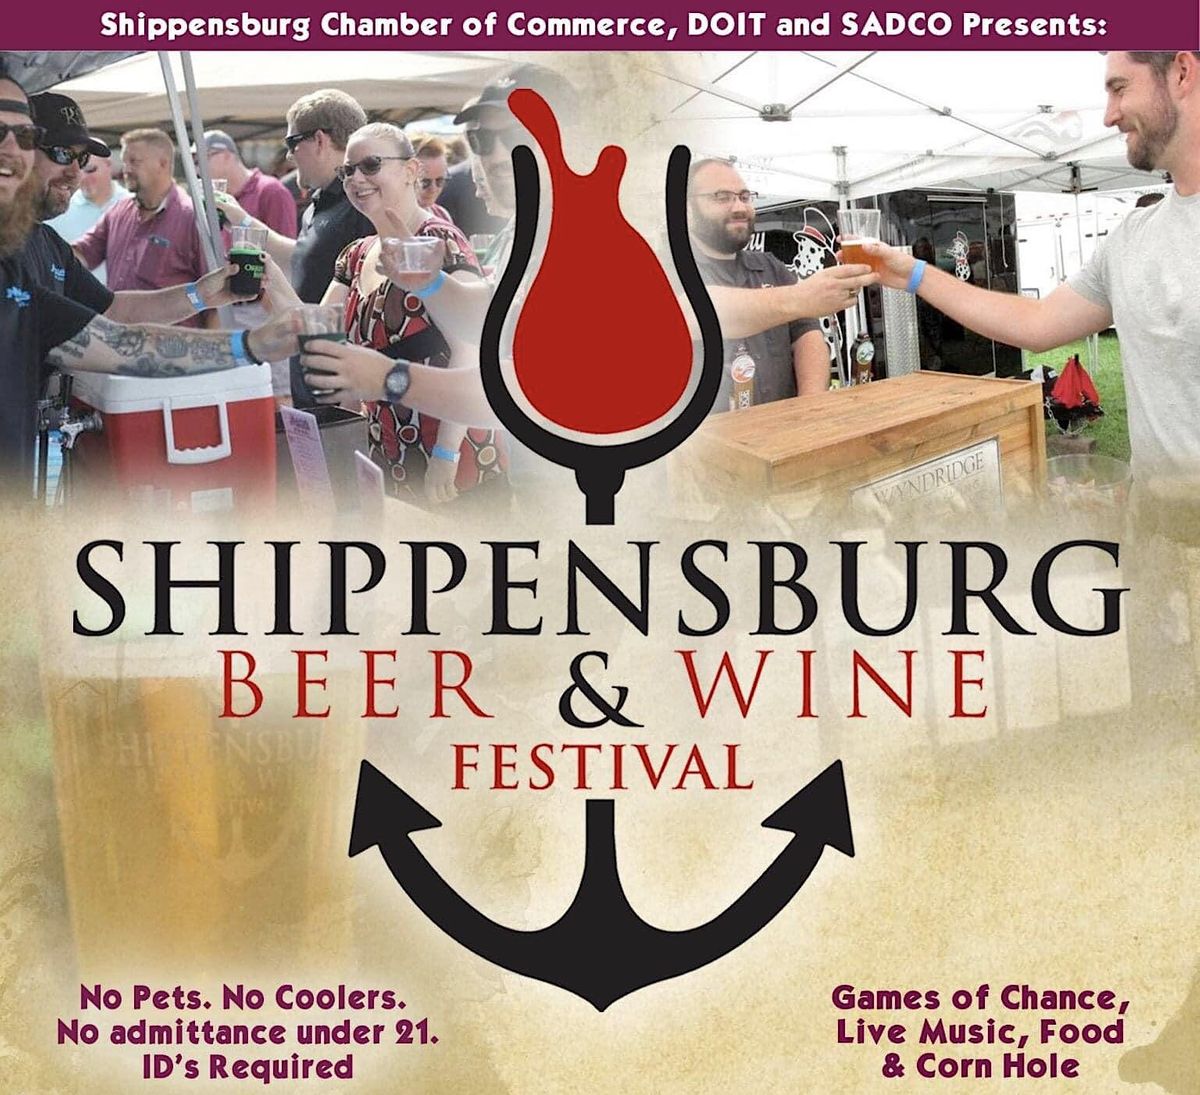 Shippensburg Beer and Wine Festival